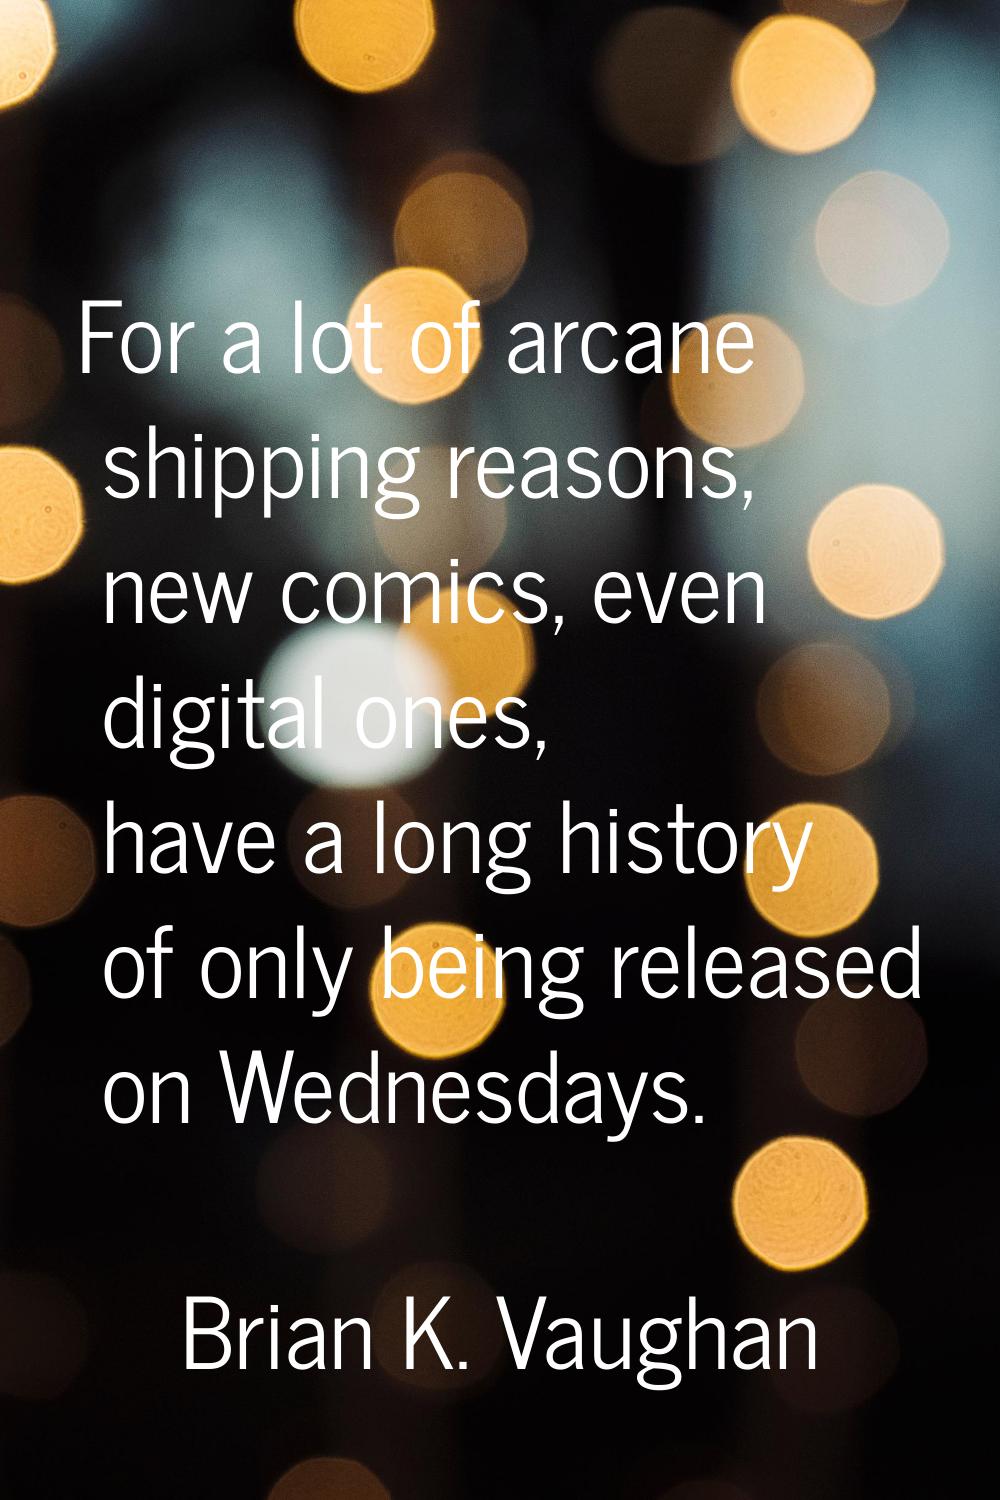 For a lot of arcane shipping reasons, new comics, even digital ones, have a long history of only be